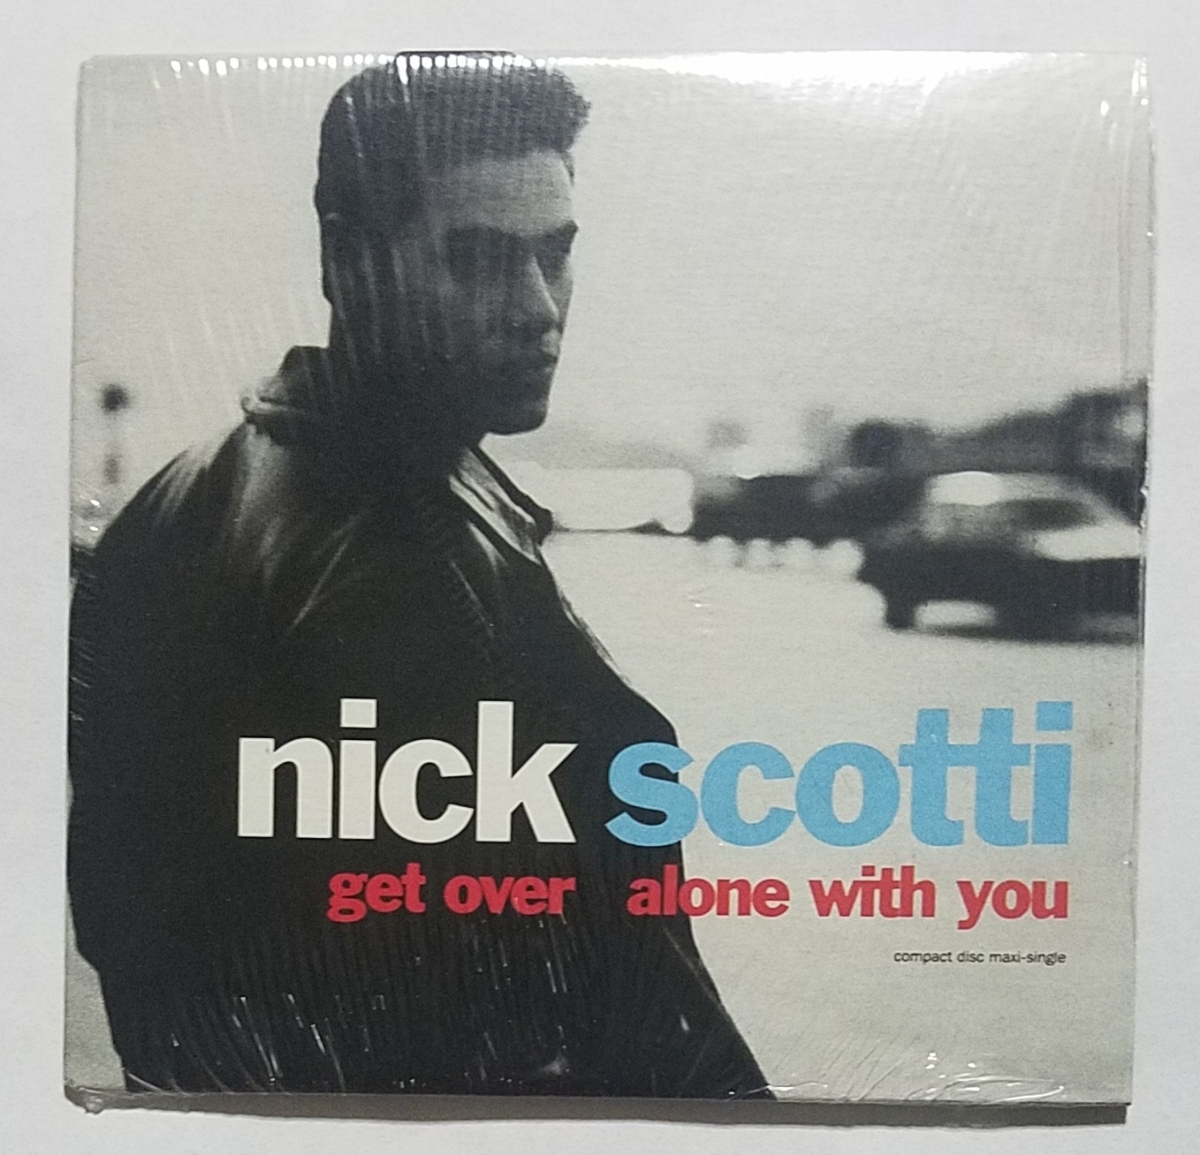 Nick Scotti Get Over Alone With You CD Single AU盤 Madonna コーラス参加+プロデュース マドンナ ニック・スコッティ シングル Maxi